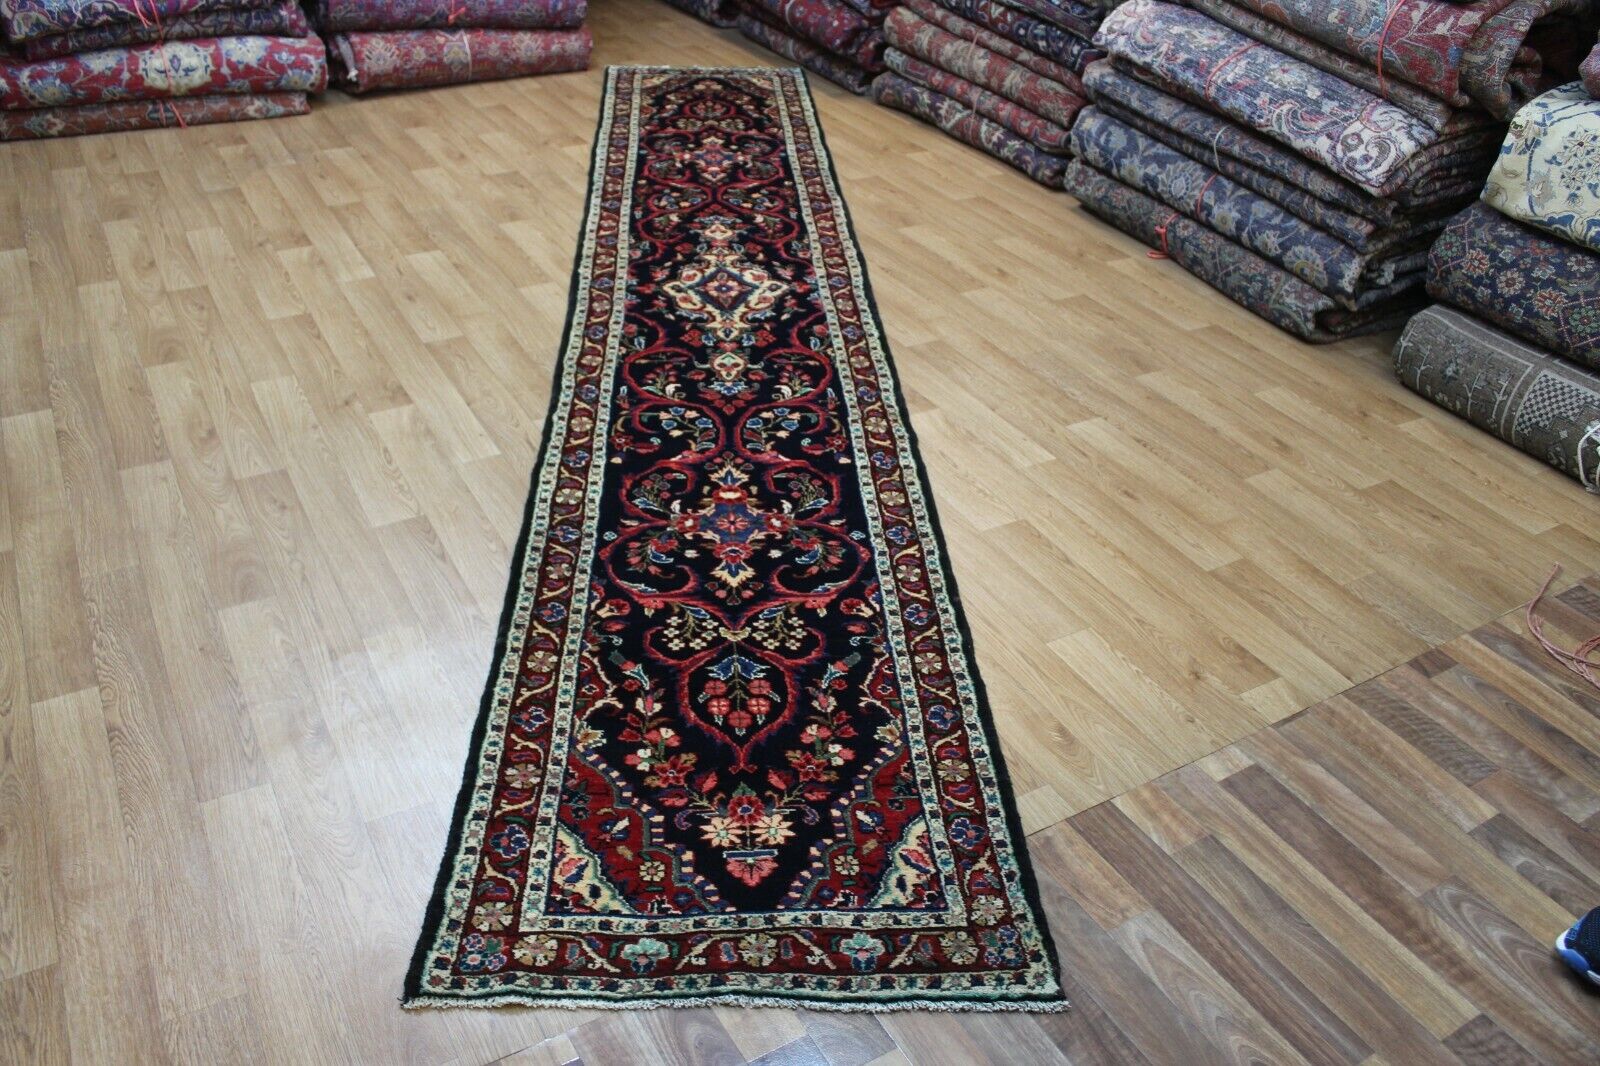 FINE HANDMADE PERSIAN RUNNER WITH A VERY PLEASING FLORAL DESIGN 430 X 80 CM 